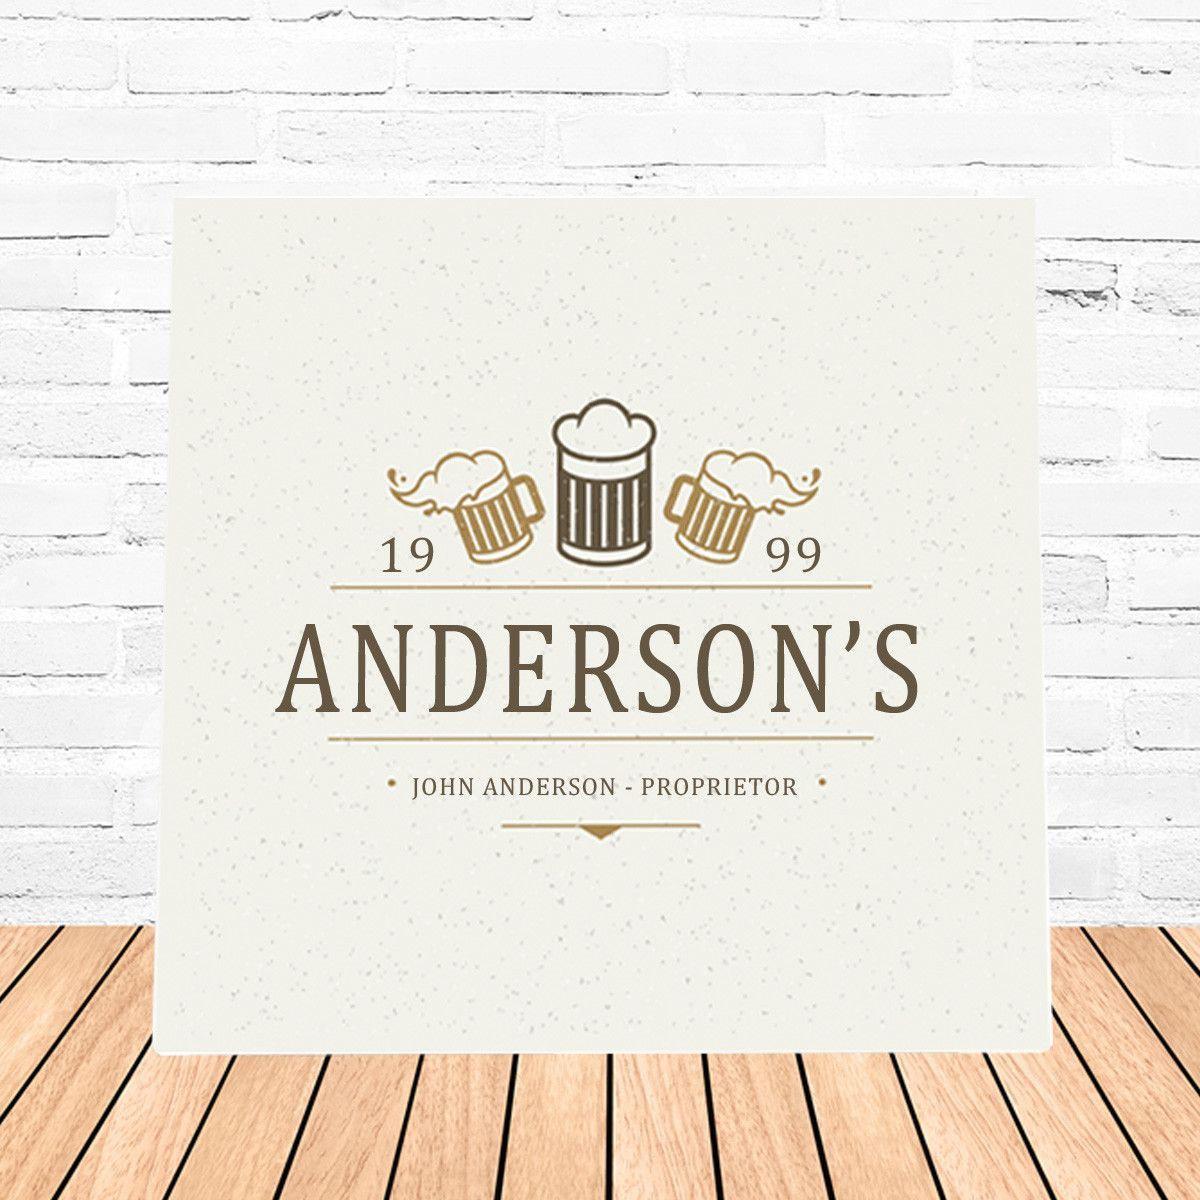 Personalized Beer Mugs Canvas Sign